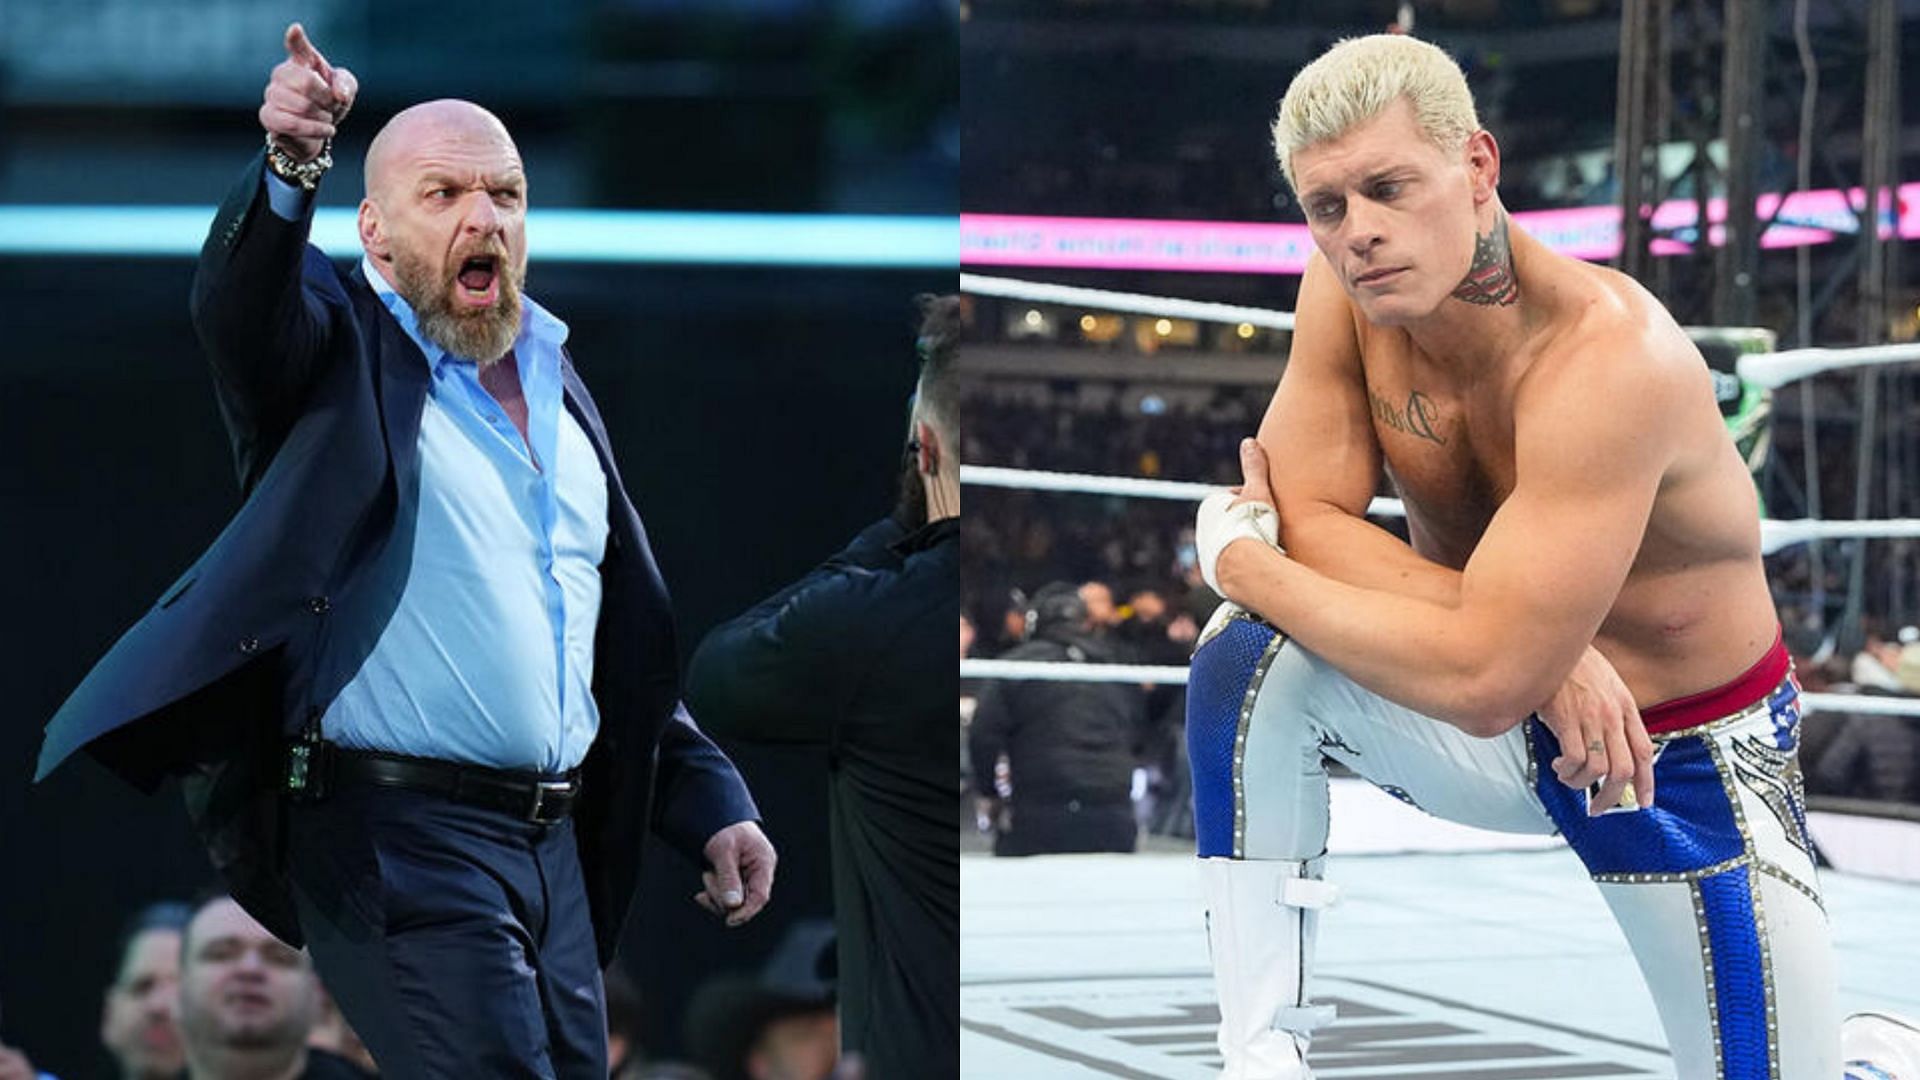 Will WWE CCO Triple H change the finish to Cody Rhodes